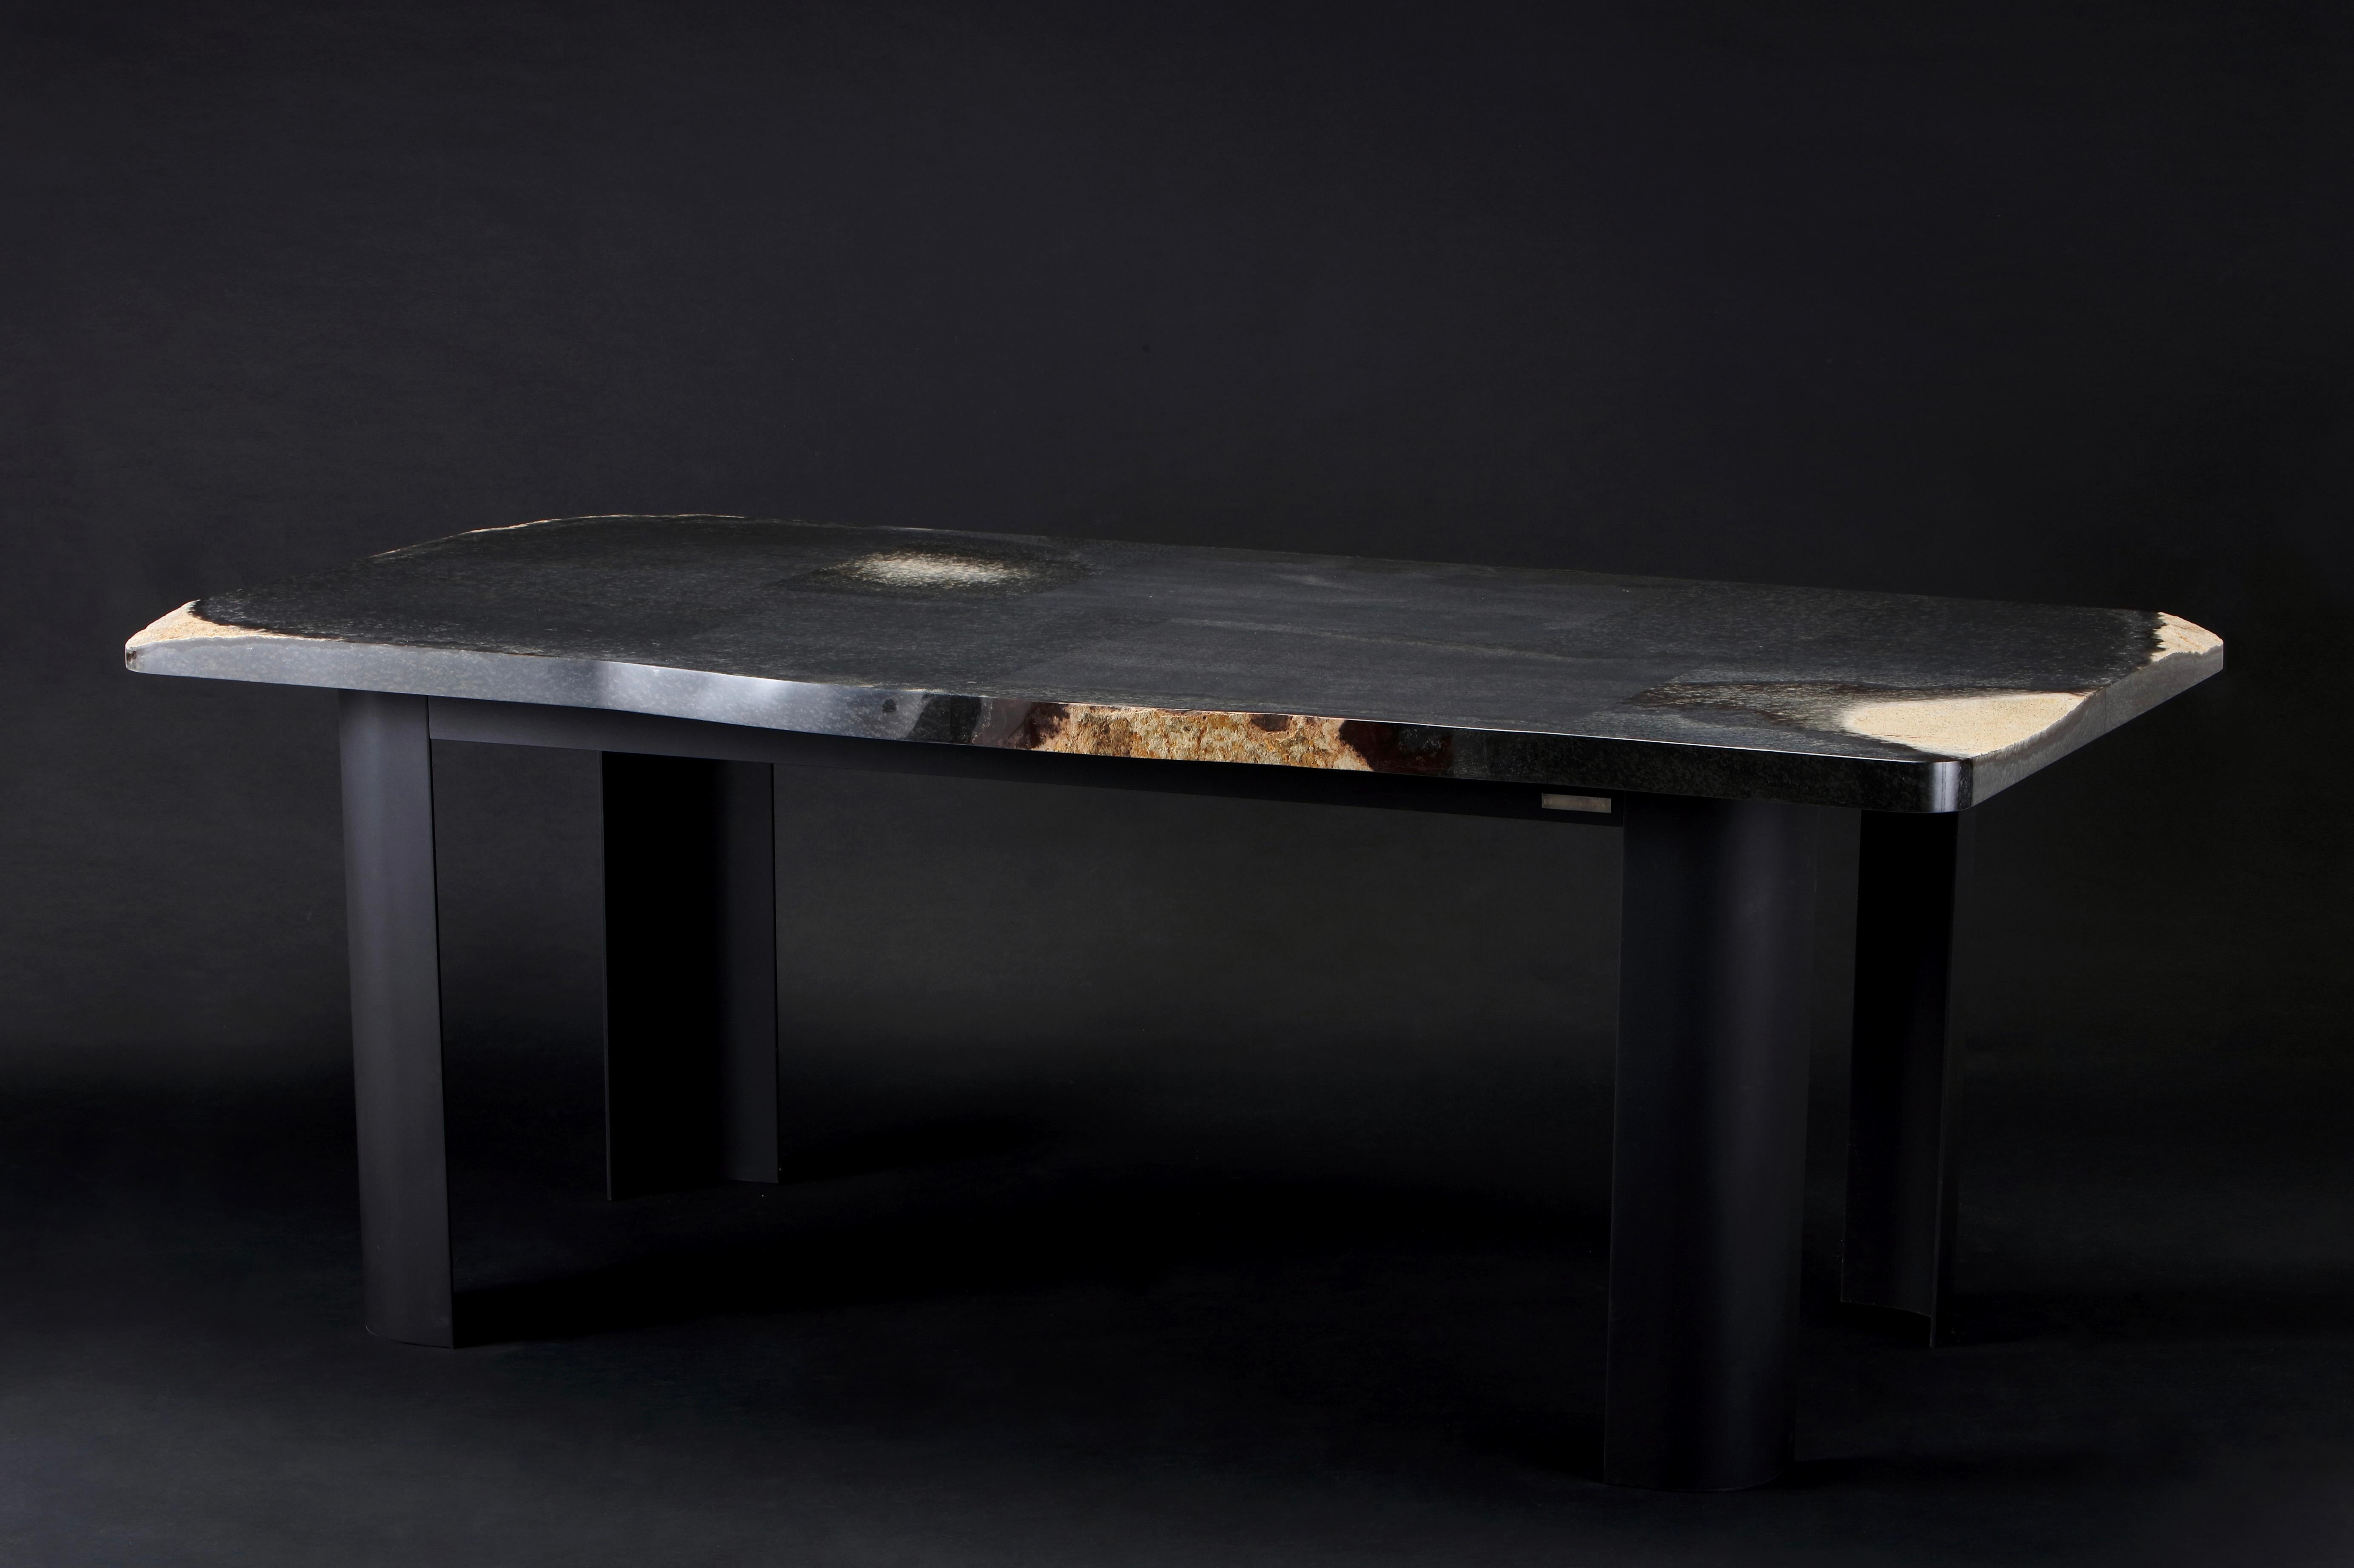 Bachelard Dining Table by Okurayama
One Of A Kind.
Dimensions: D 90 x W 180 x H 75 cm.
Material: Daté Kan Stone and iron.

The Daté Kan Stone is a rare stone that exist only in a few mountains in Japan.

The defining characteristic of Date´ Kan